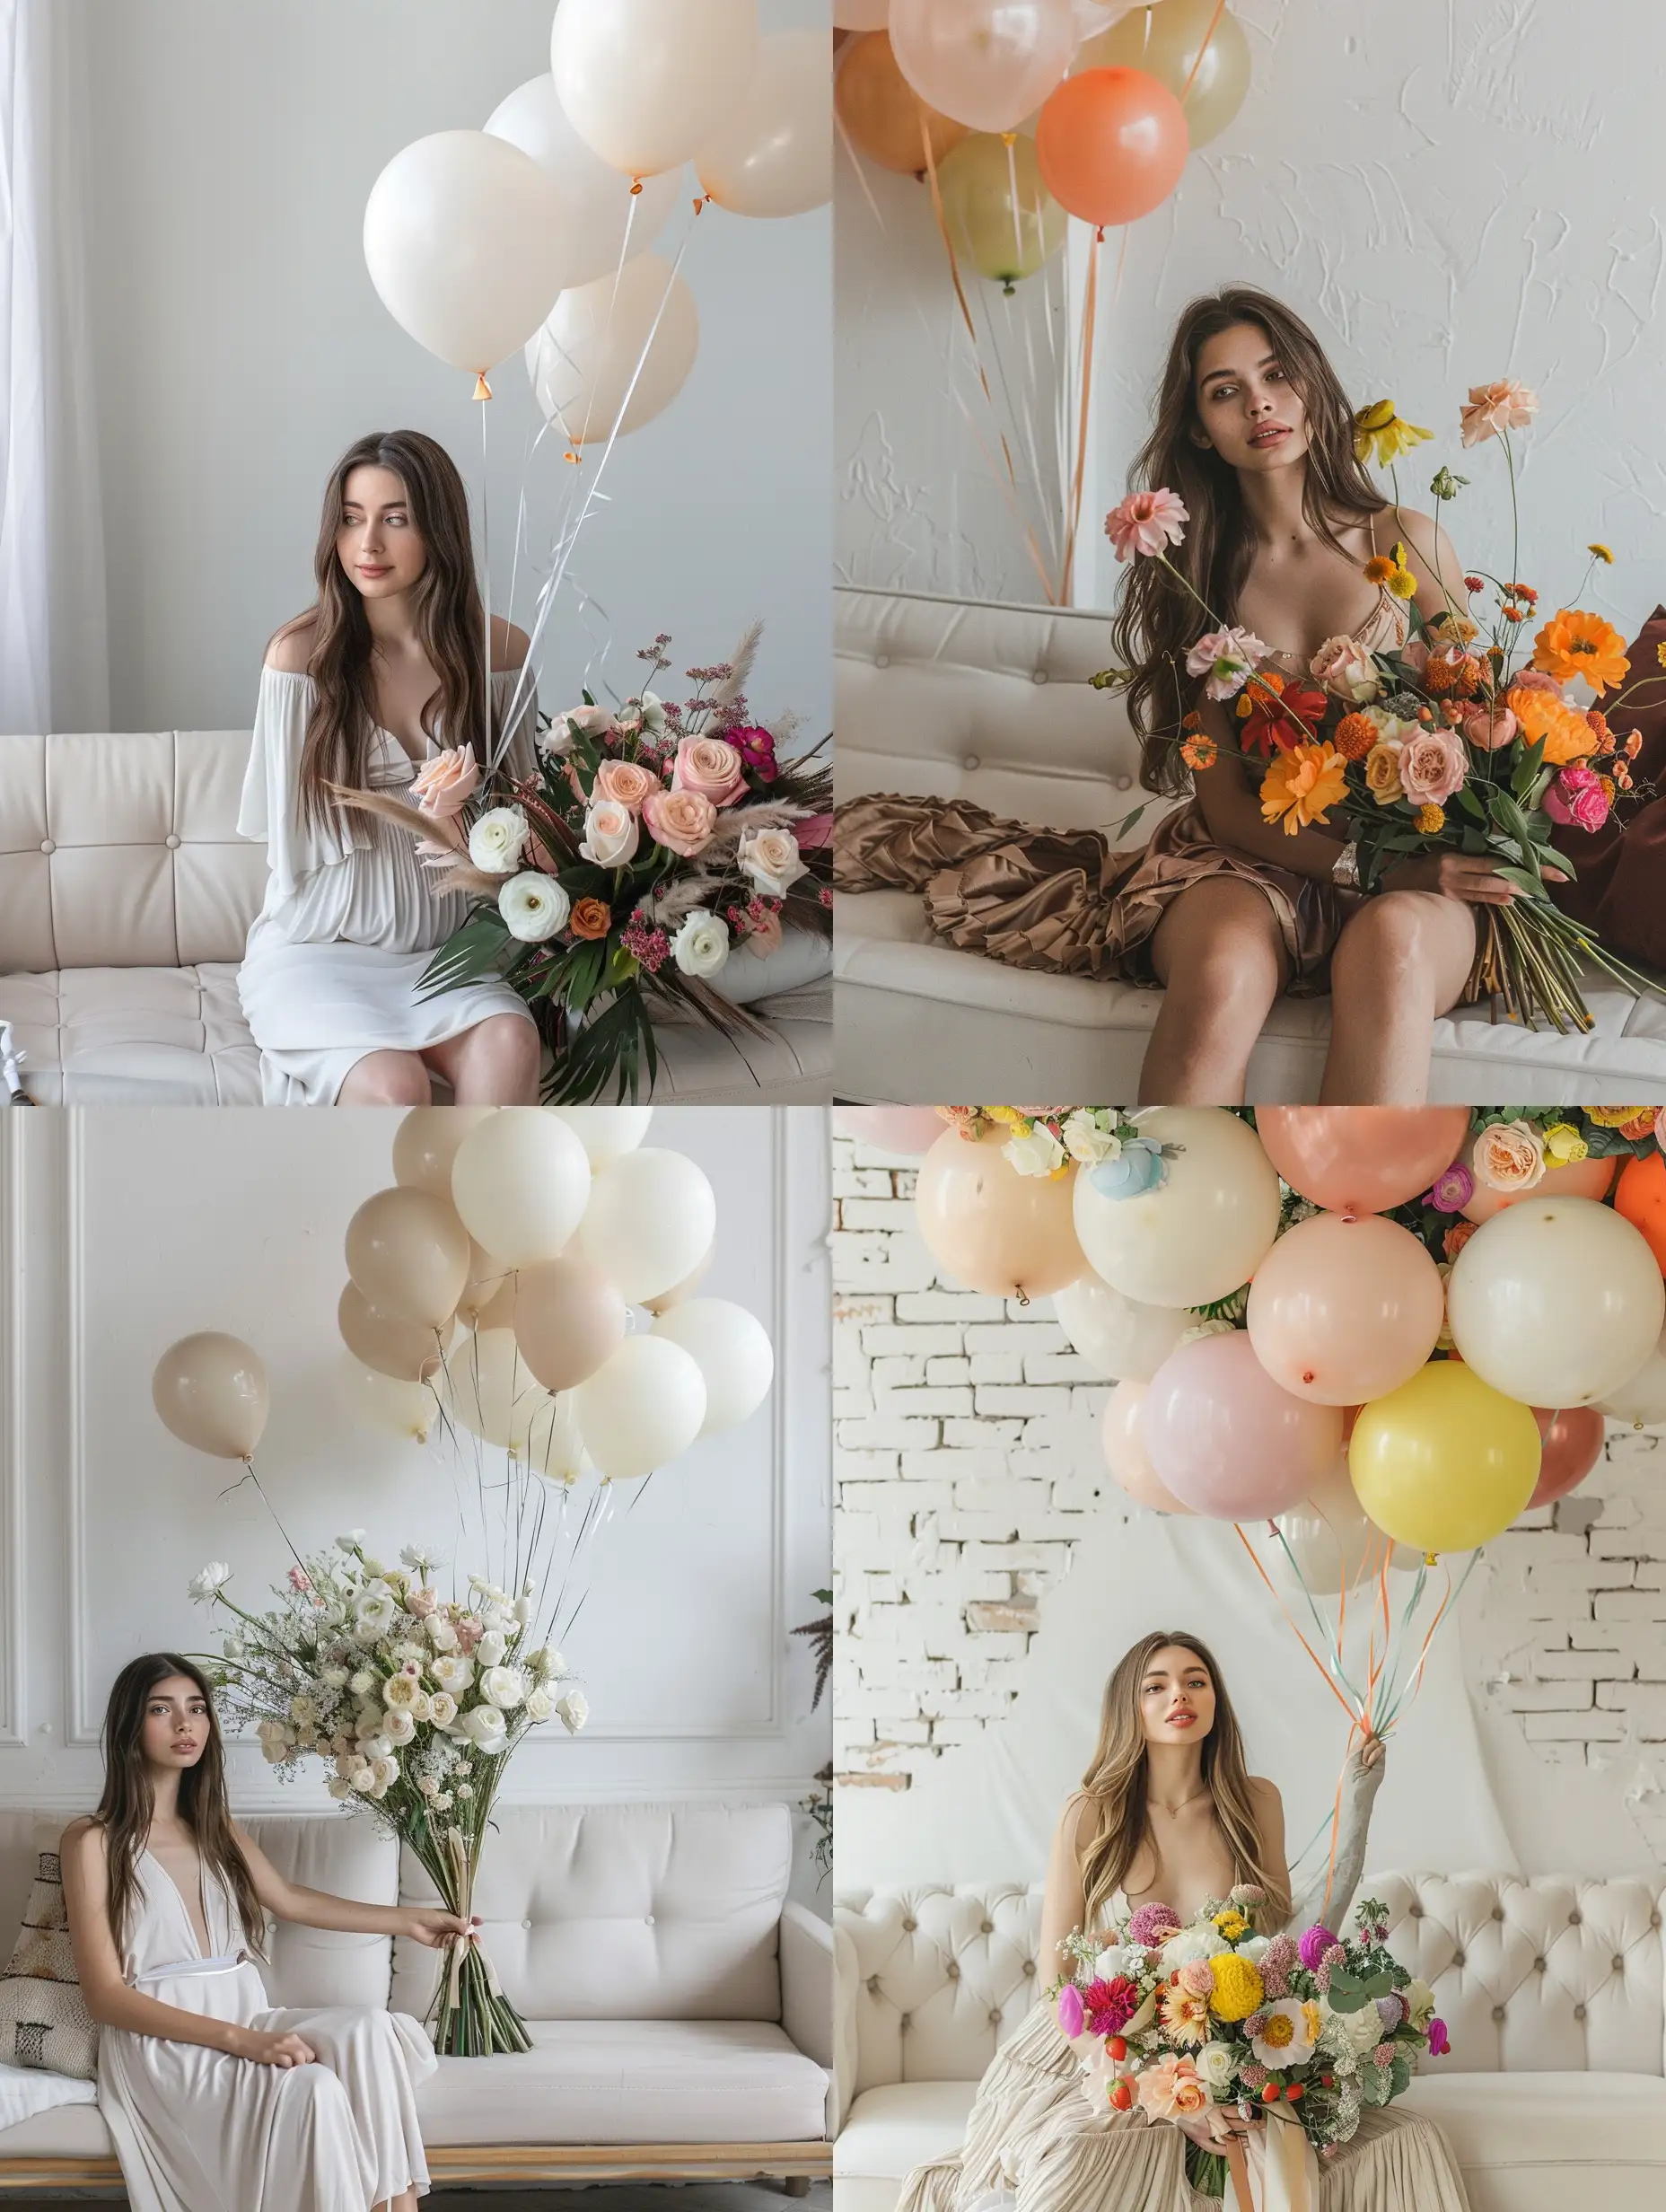 Woman-with-Long-Hair-Holding-Bouquet-on-Birthday-in-Studio-with-Balloons